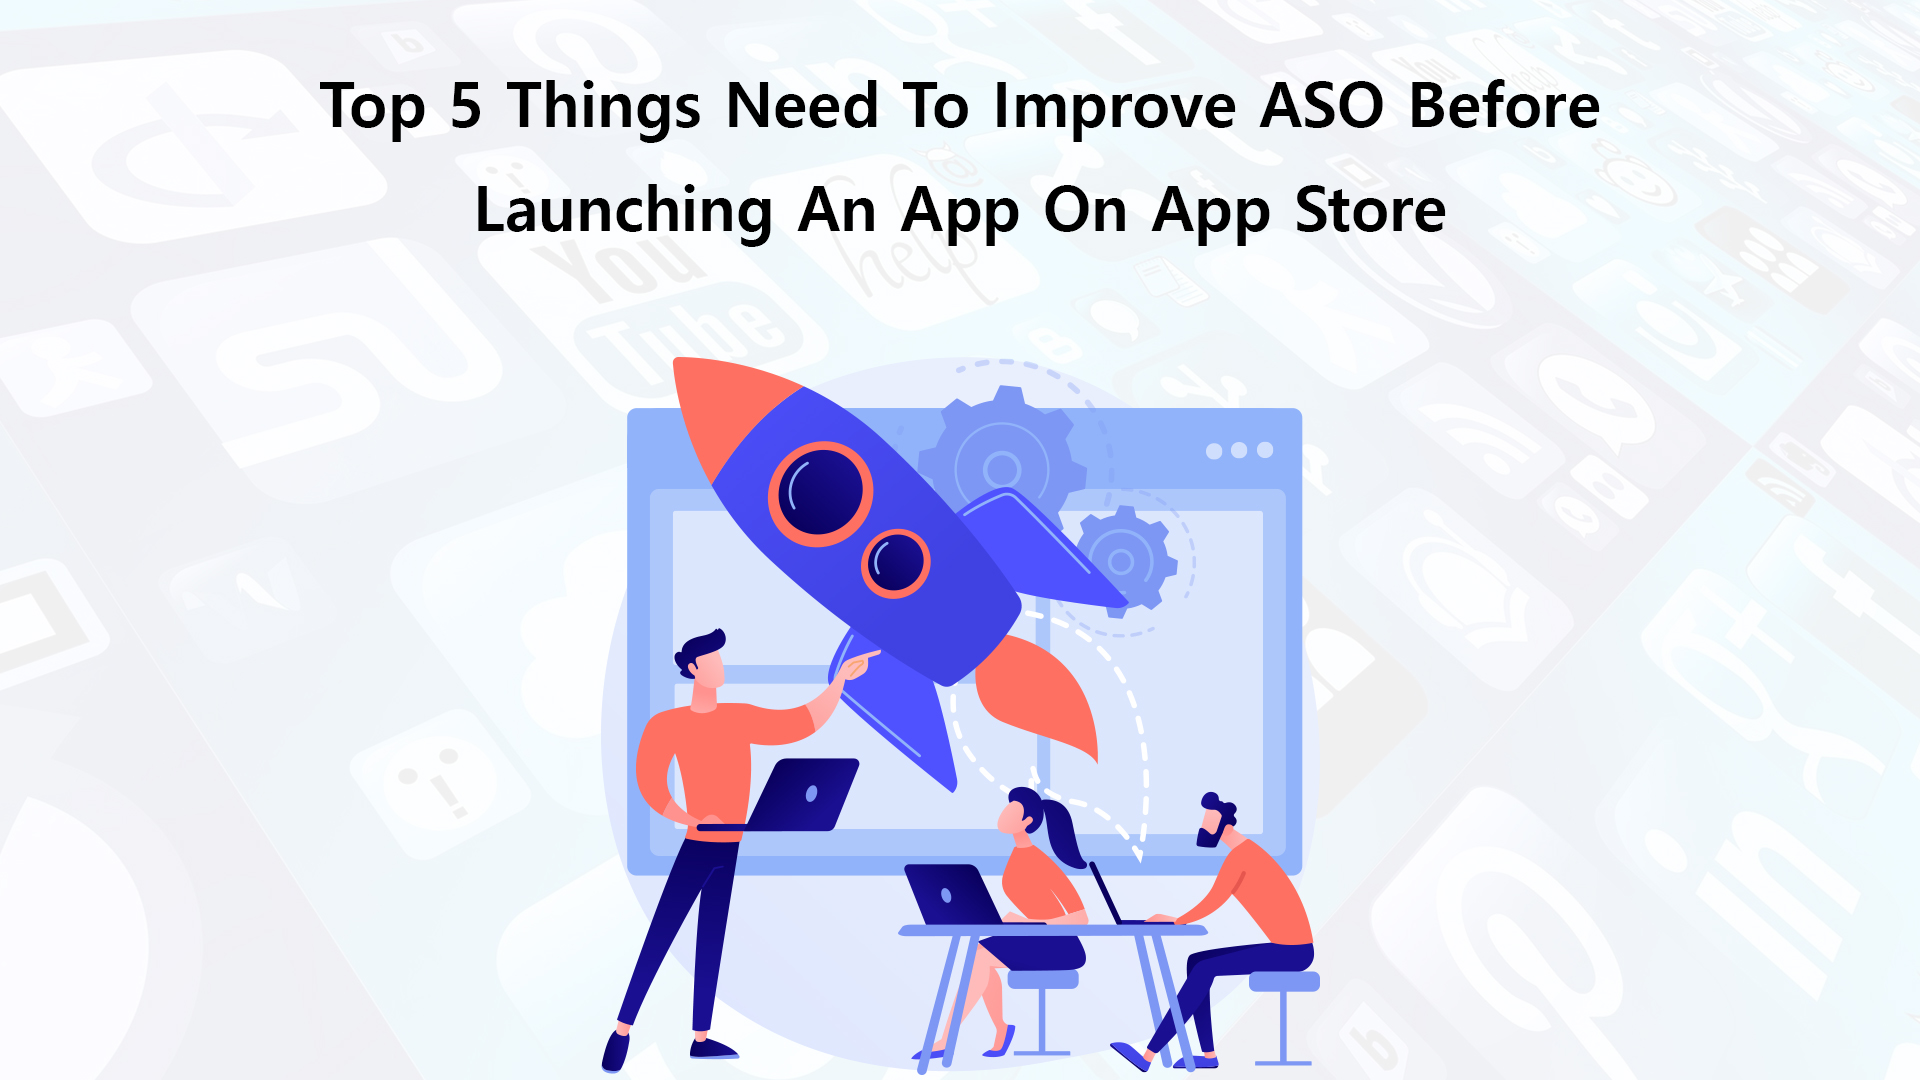 Top 5 Things Need To Improve ASO Before Launching An App On App Store